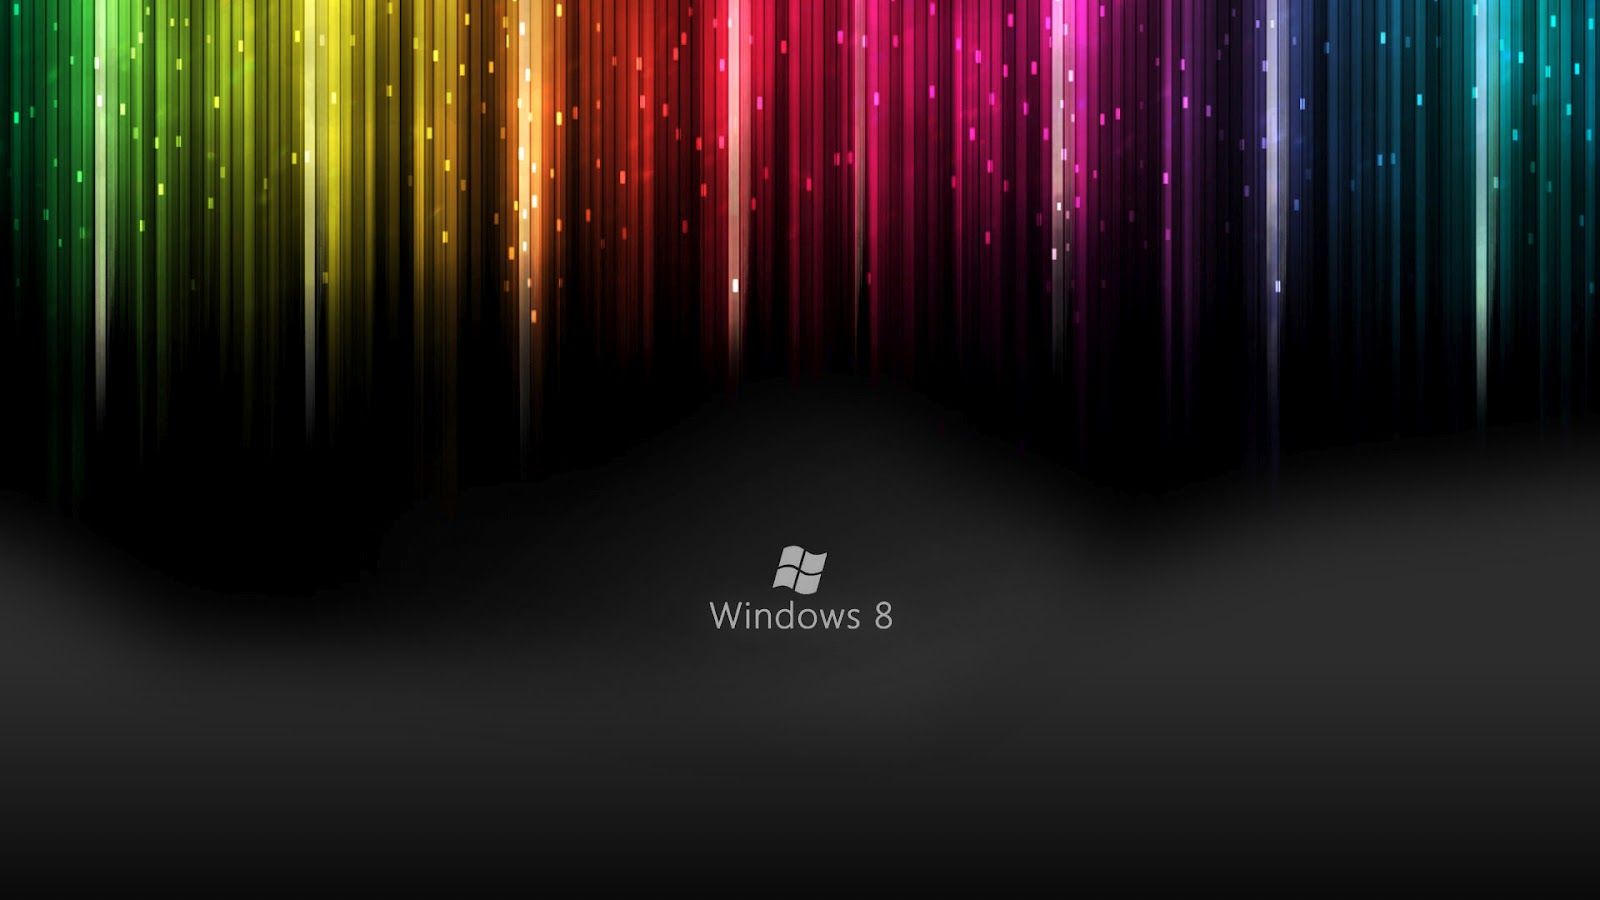 Background for Windows 8 Hd Backgrounds